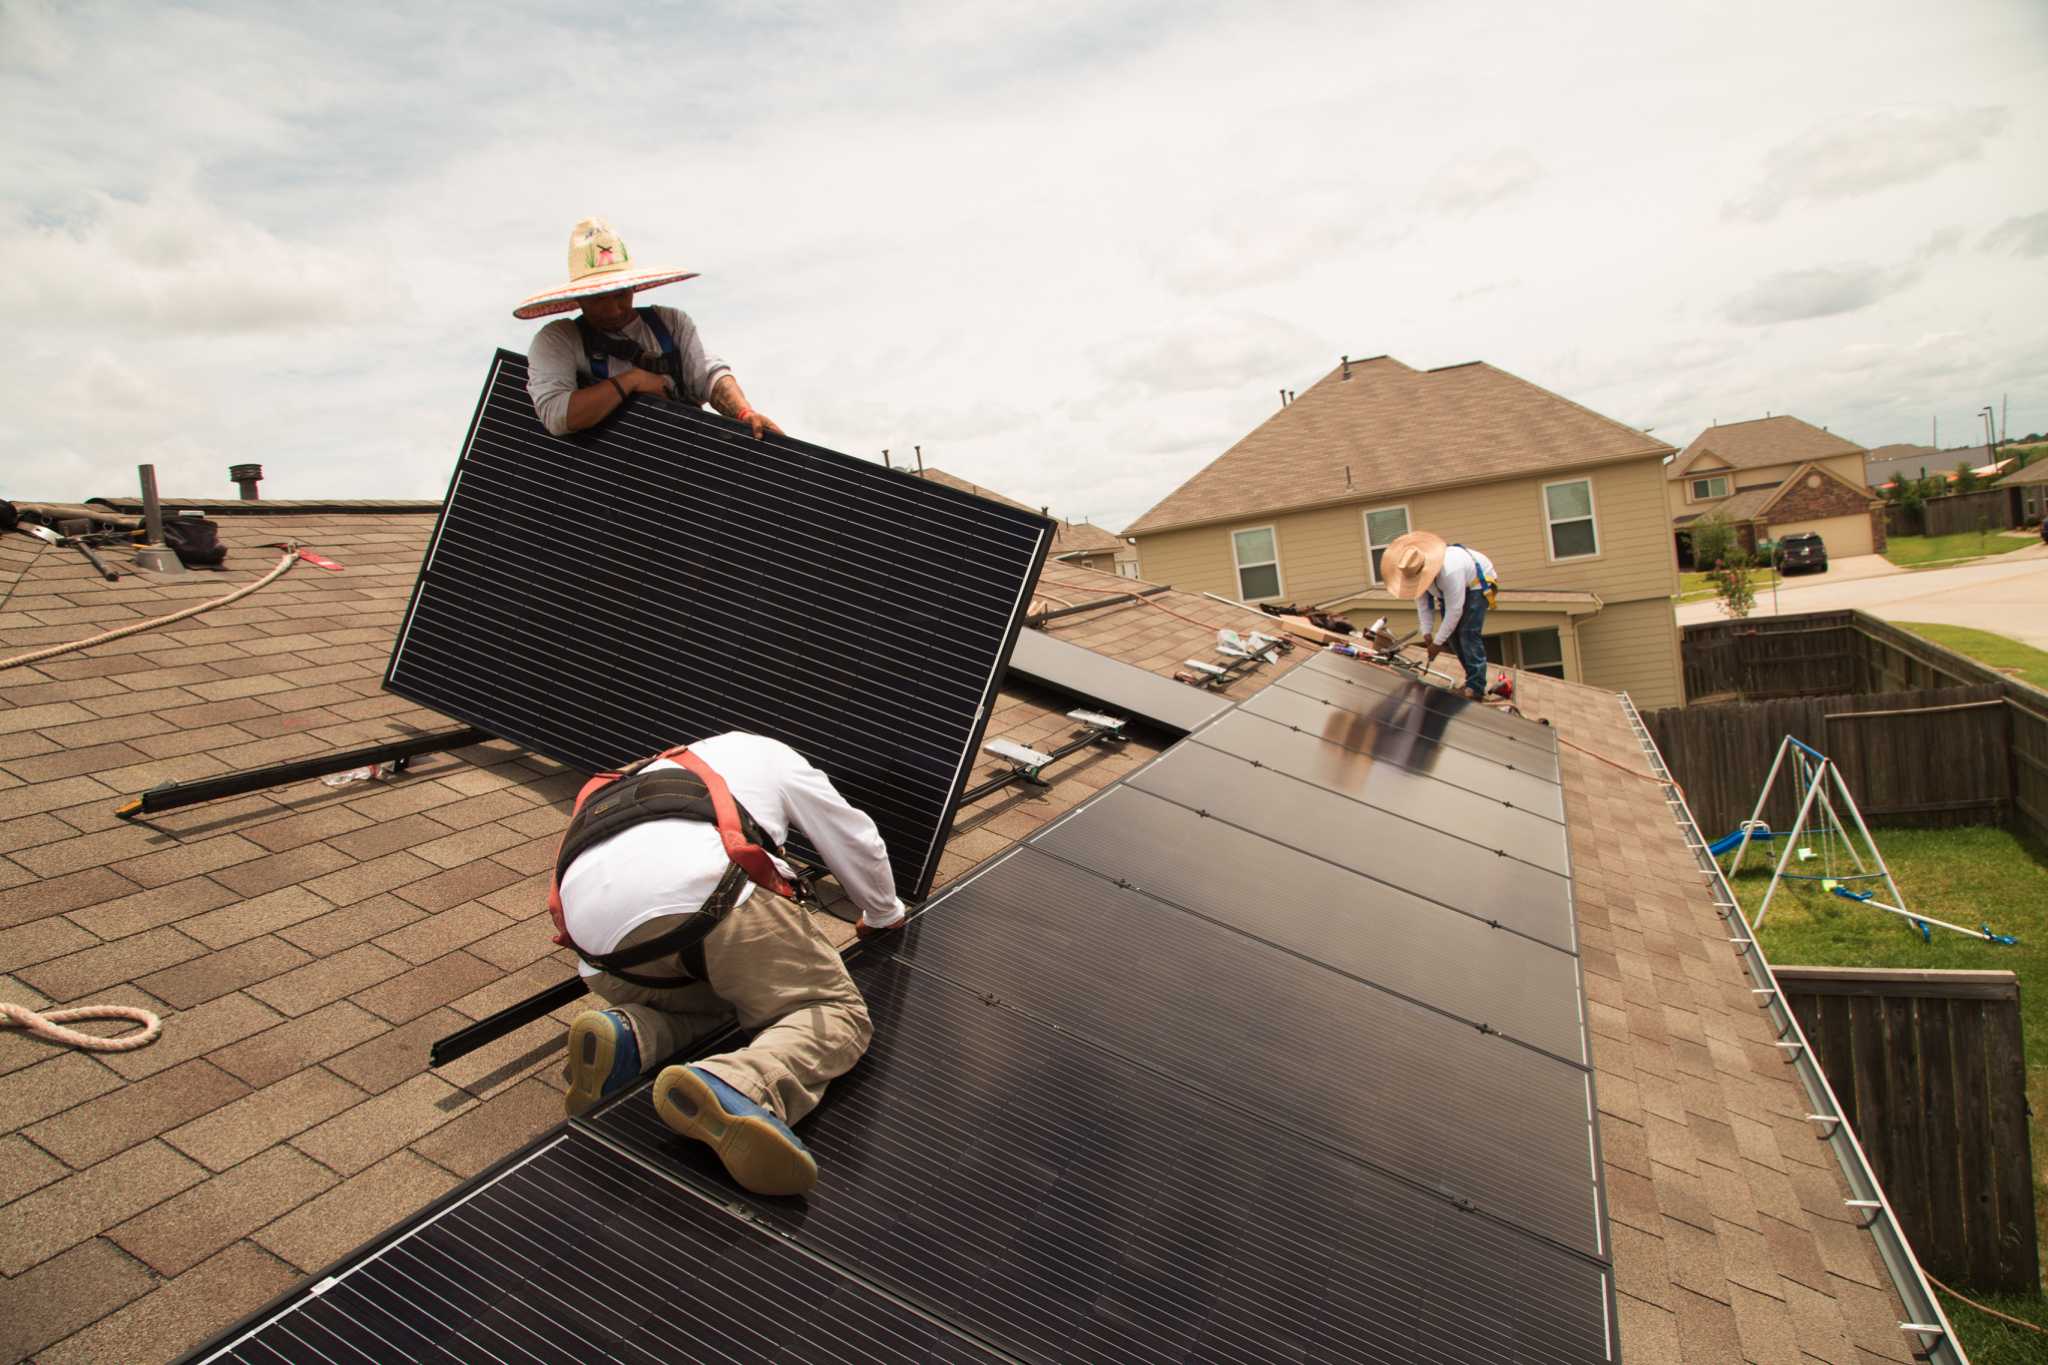 el-paso-electric-rate-increase-would-harm-solar-industry-city-council-says